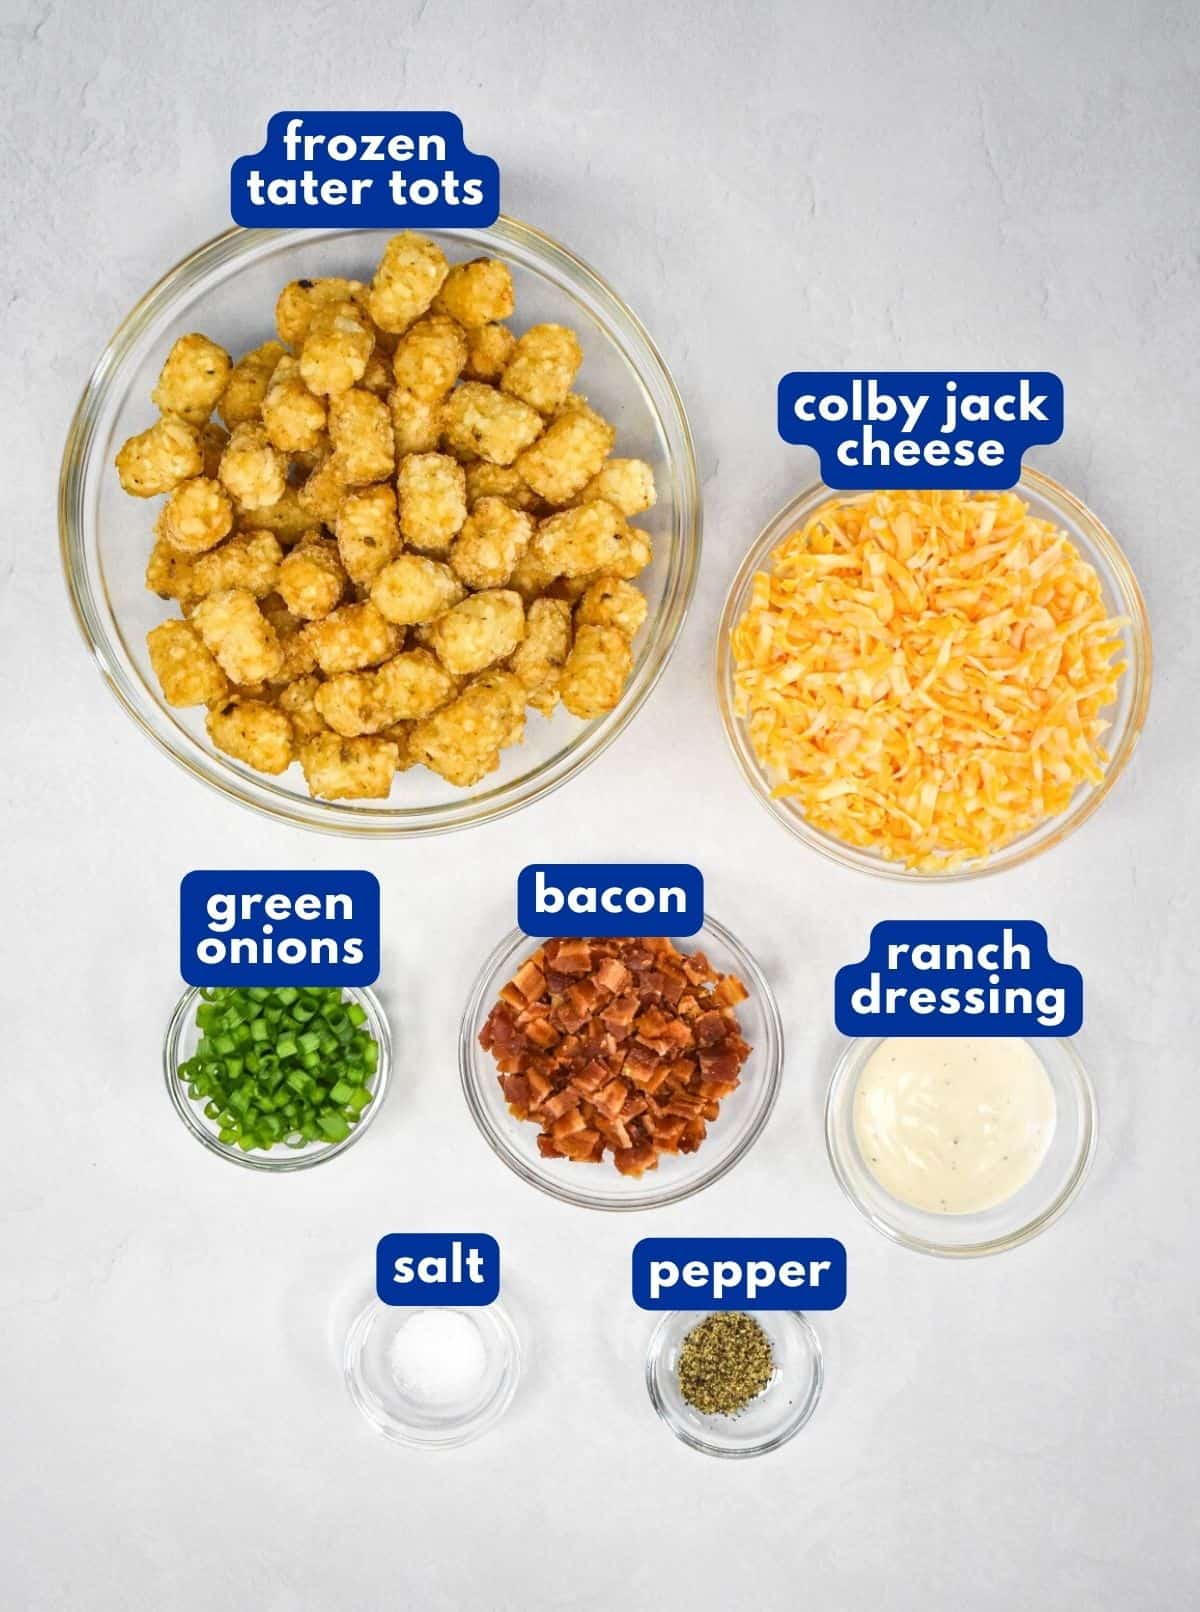 The ingredients for the loaded tater tots prepped and arranged on a white table with each labeled in blue and white letters.